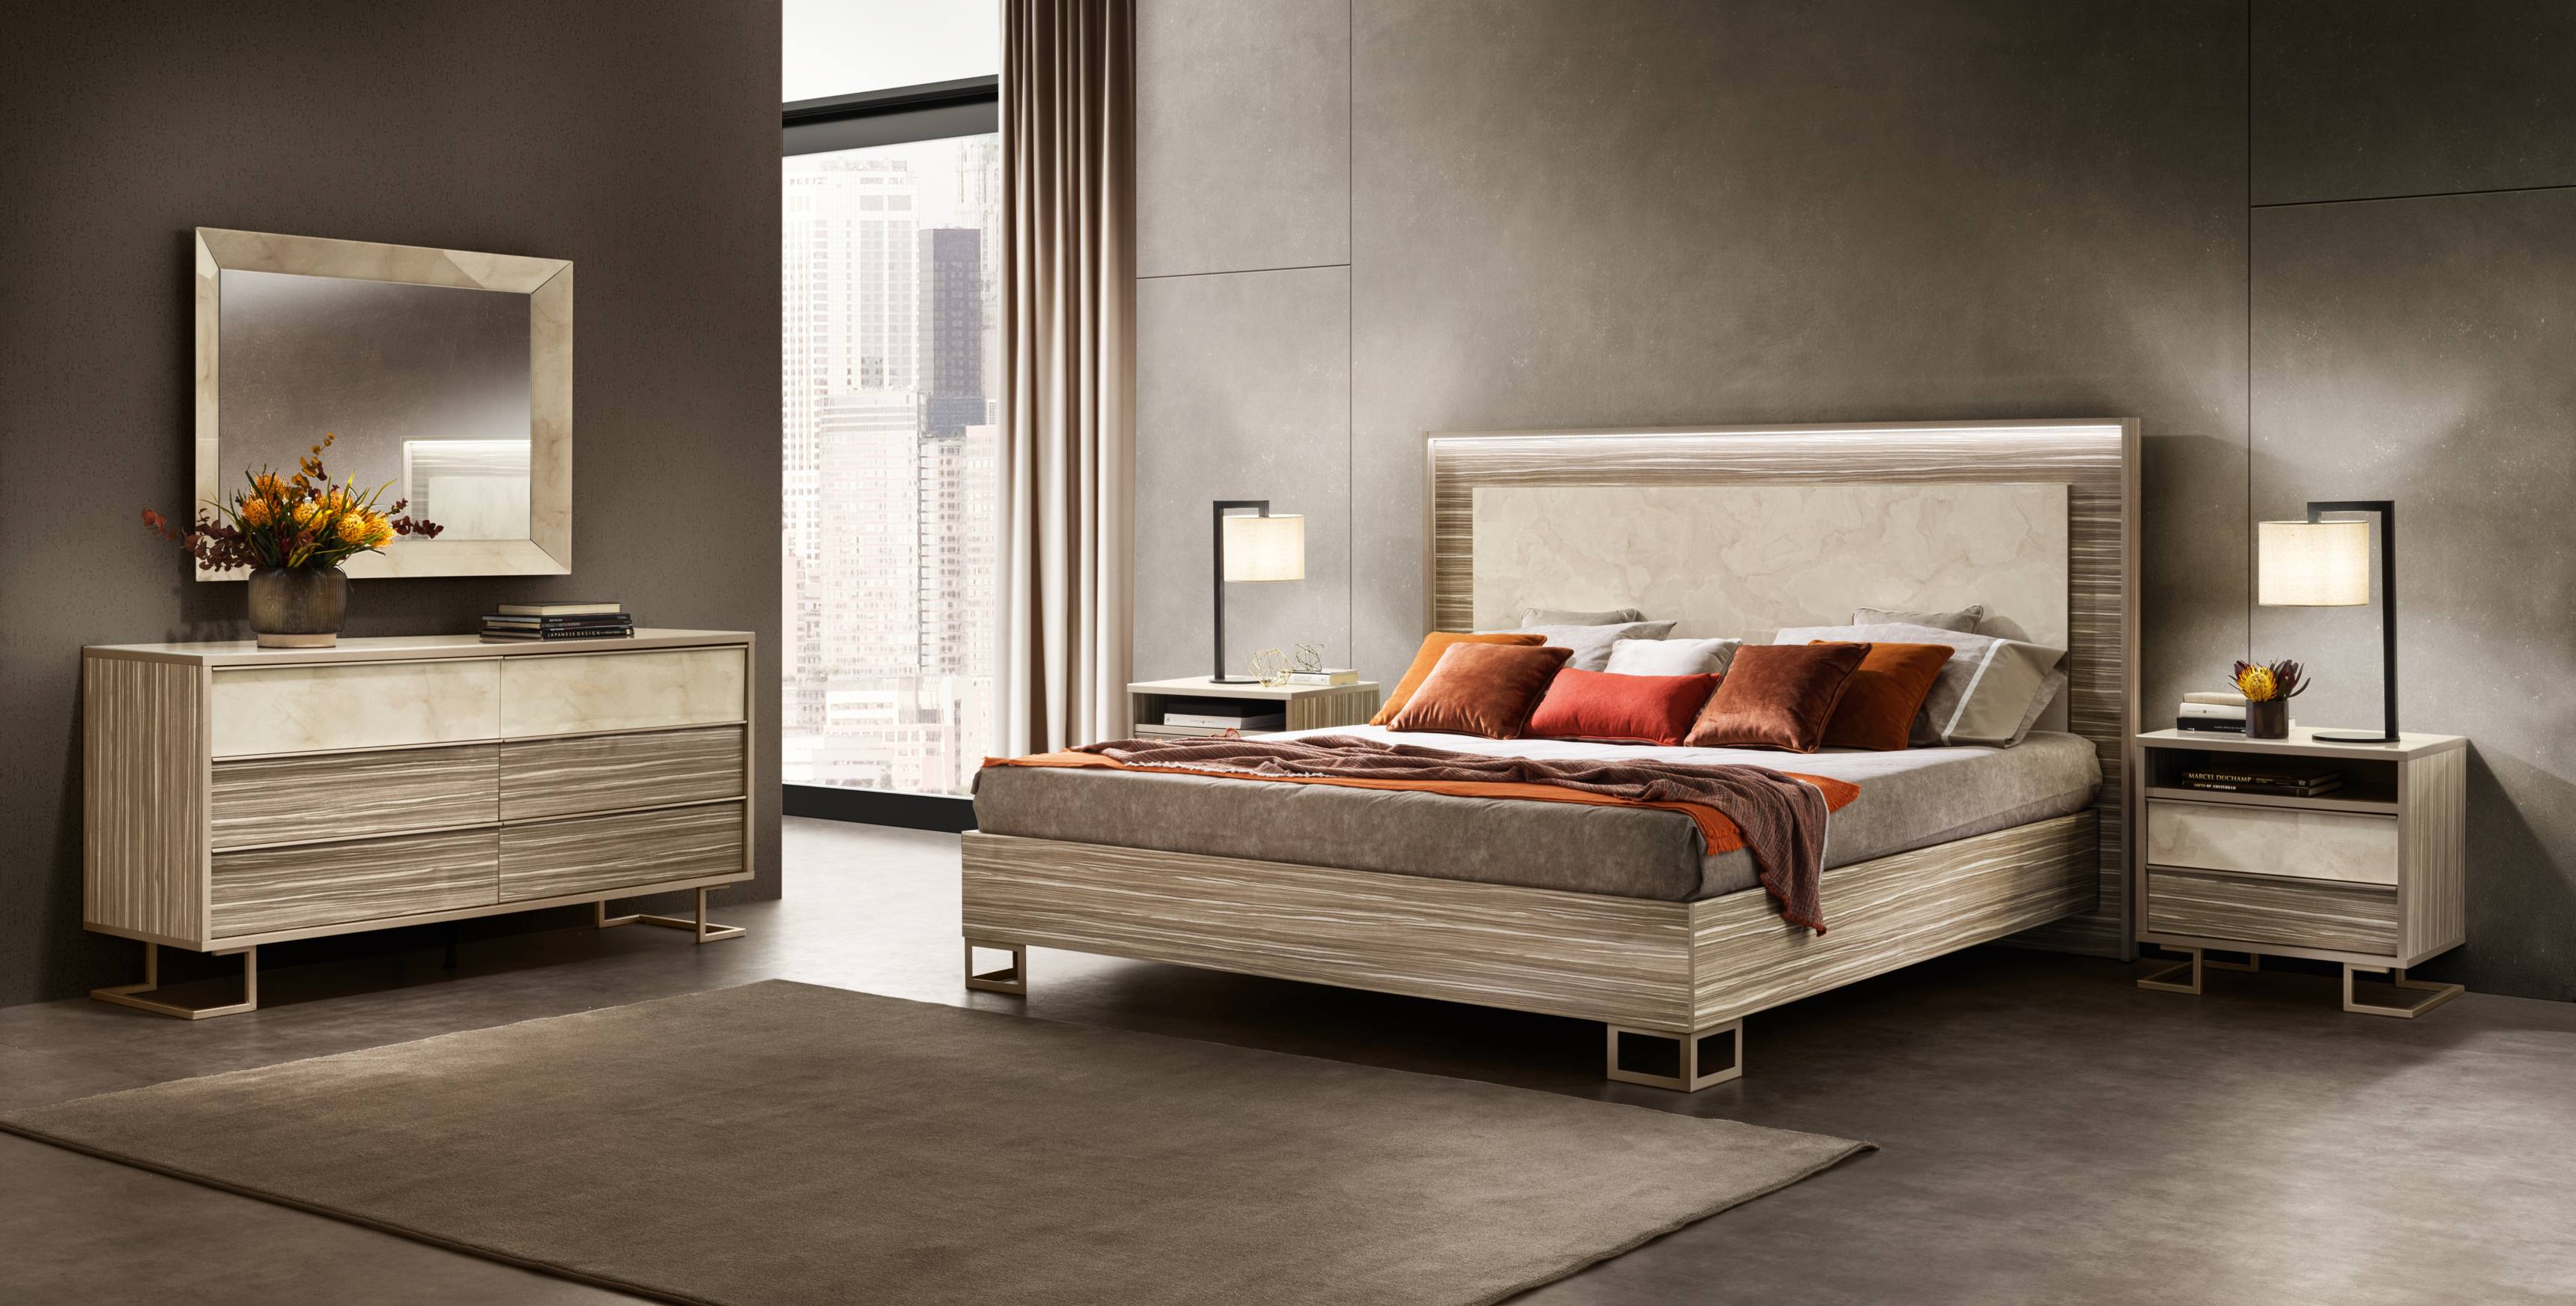 Adora Luce Light wooden headboard bed with LED LIGHT, 6 drawers dresser with mirror and night tables